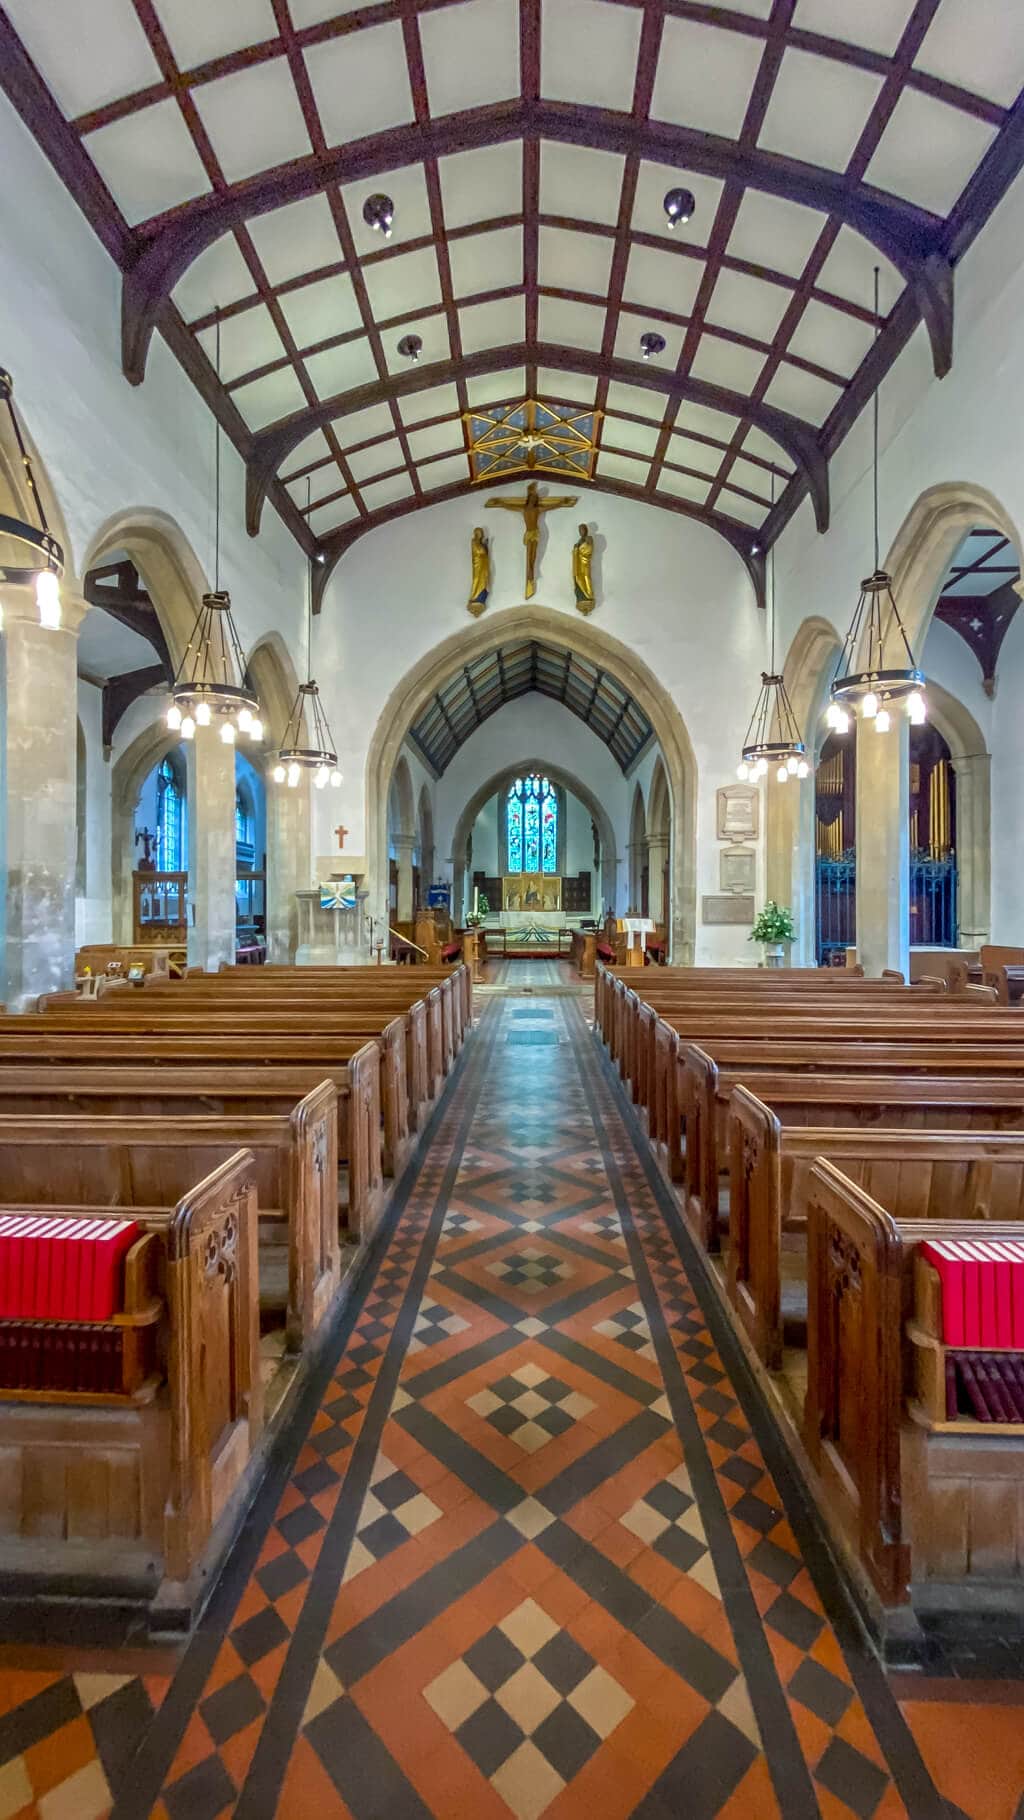 interior of st marys church - pews, floor with interesting design, and ceiling with wood beams